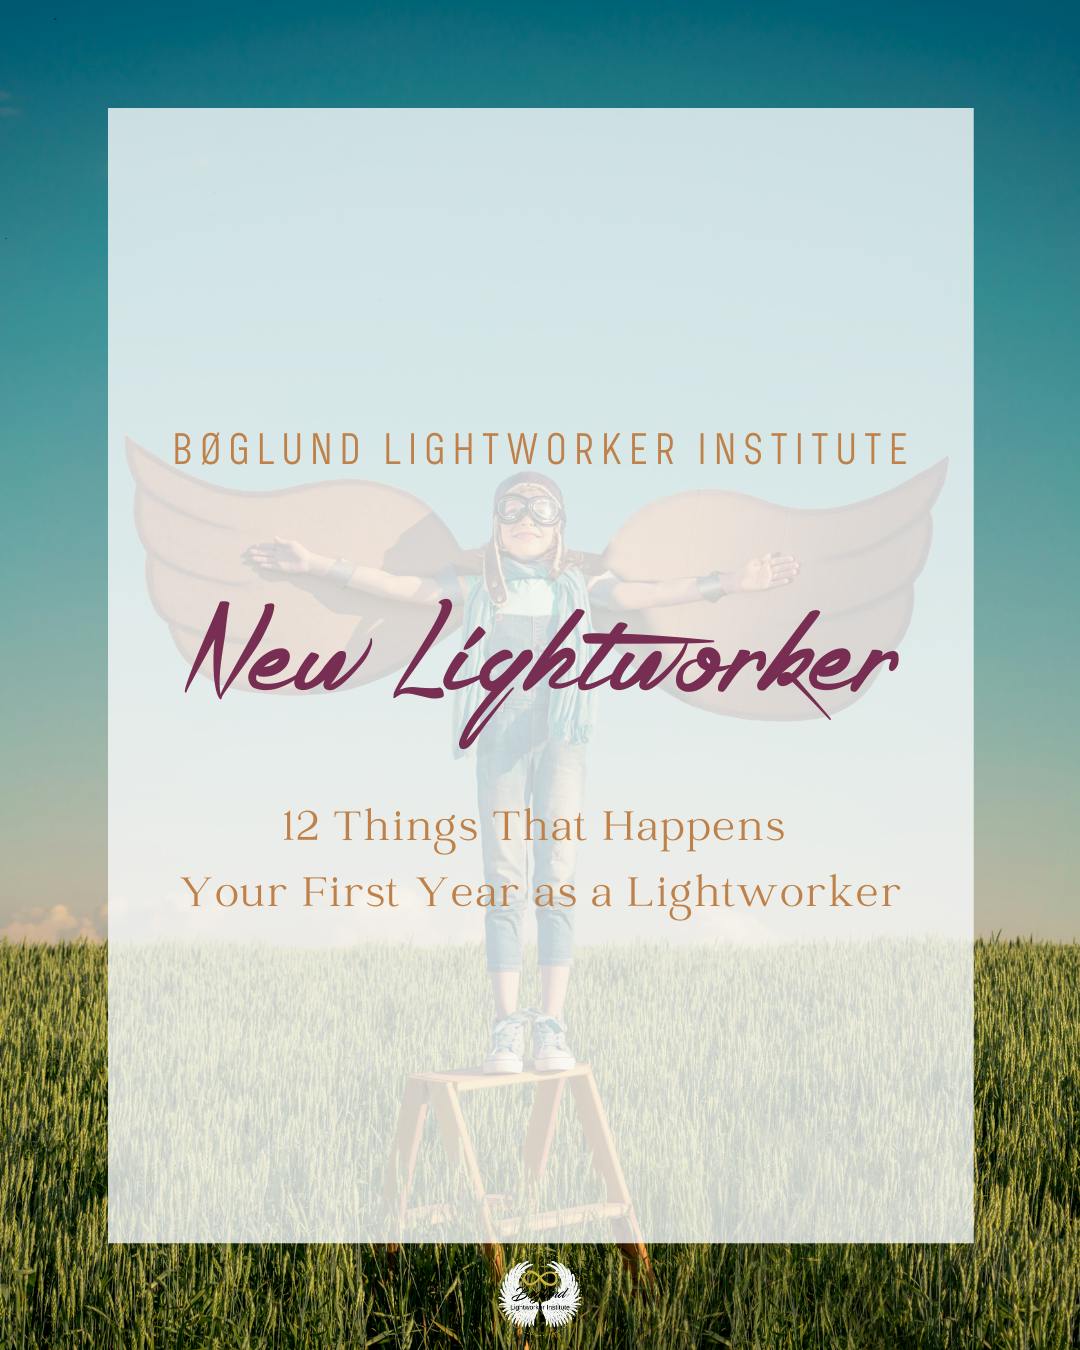 [GUIDE] 12 Things That Happens Your First Year as a Lightworker